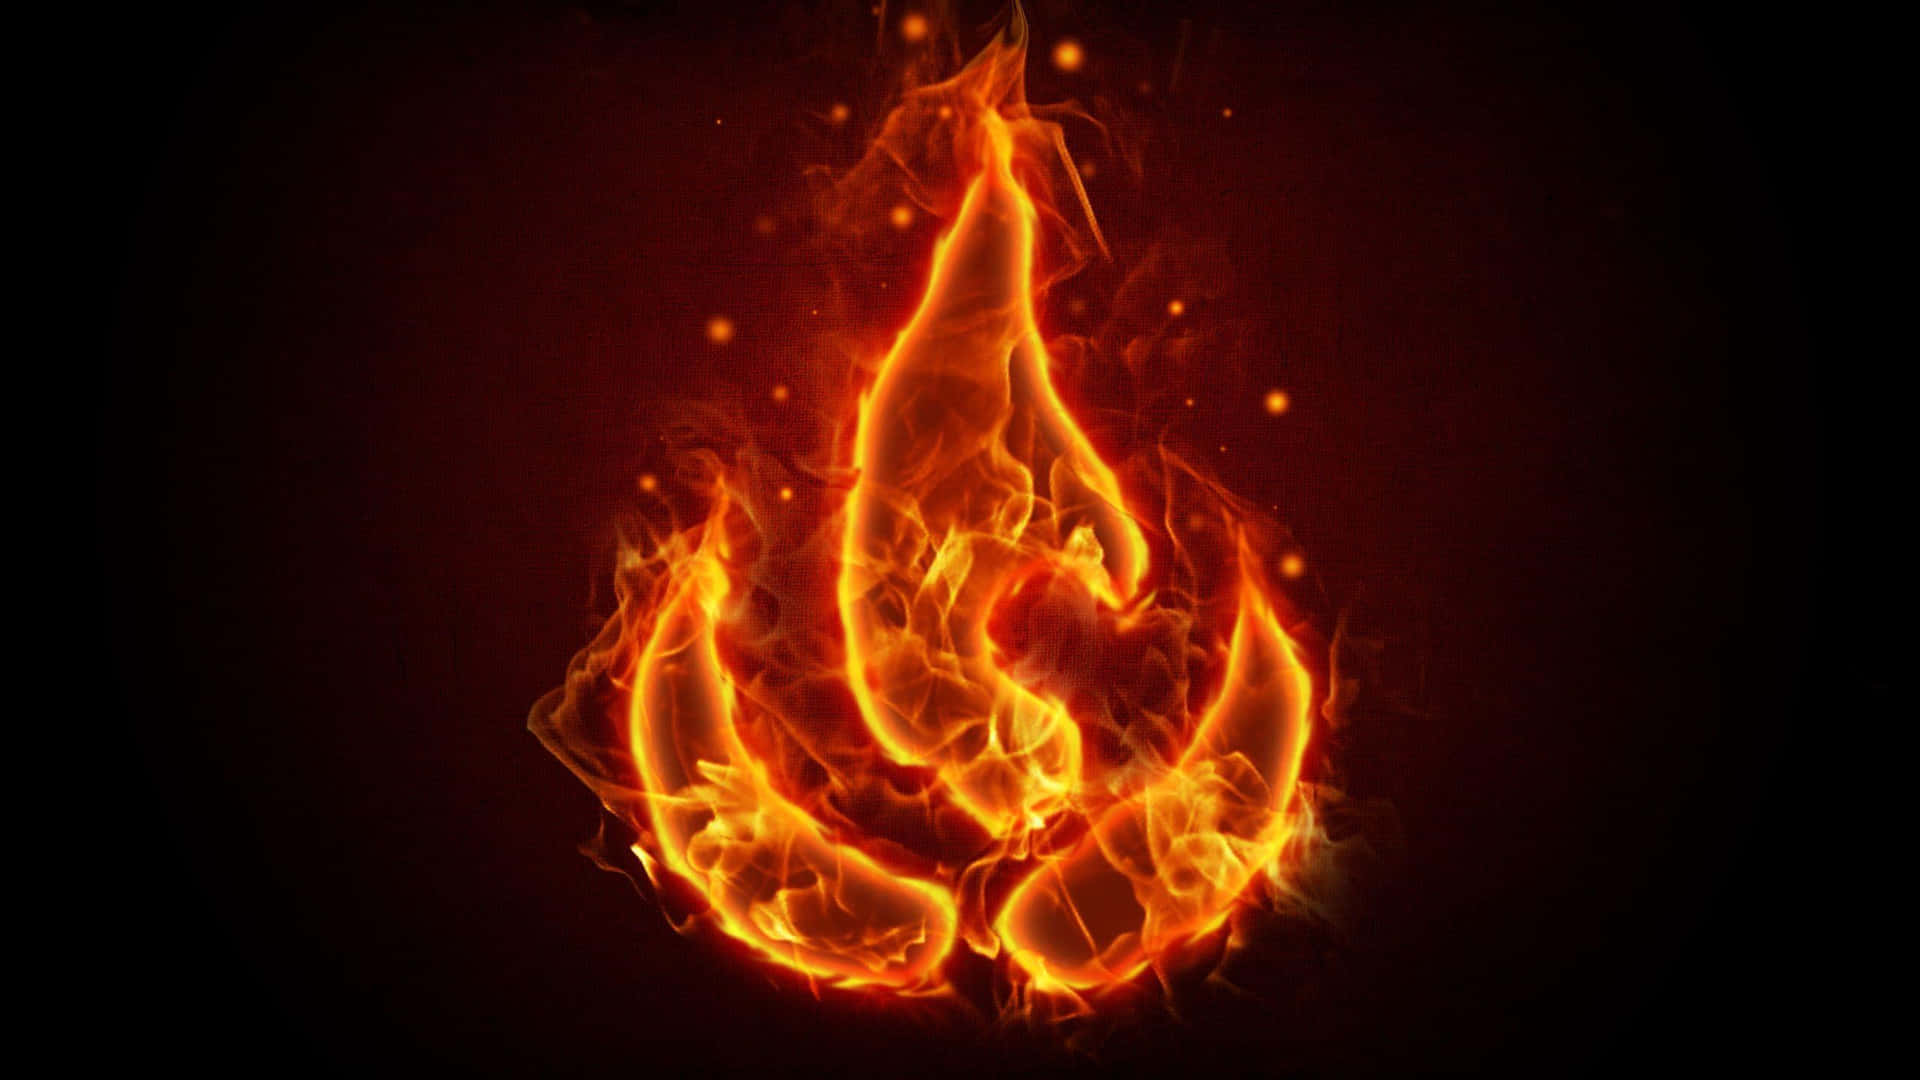 Fiery 3D Flames Igniting the Screen Wallpaper